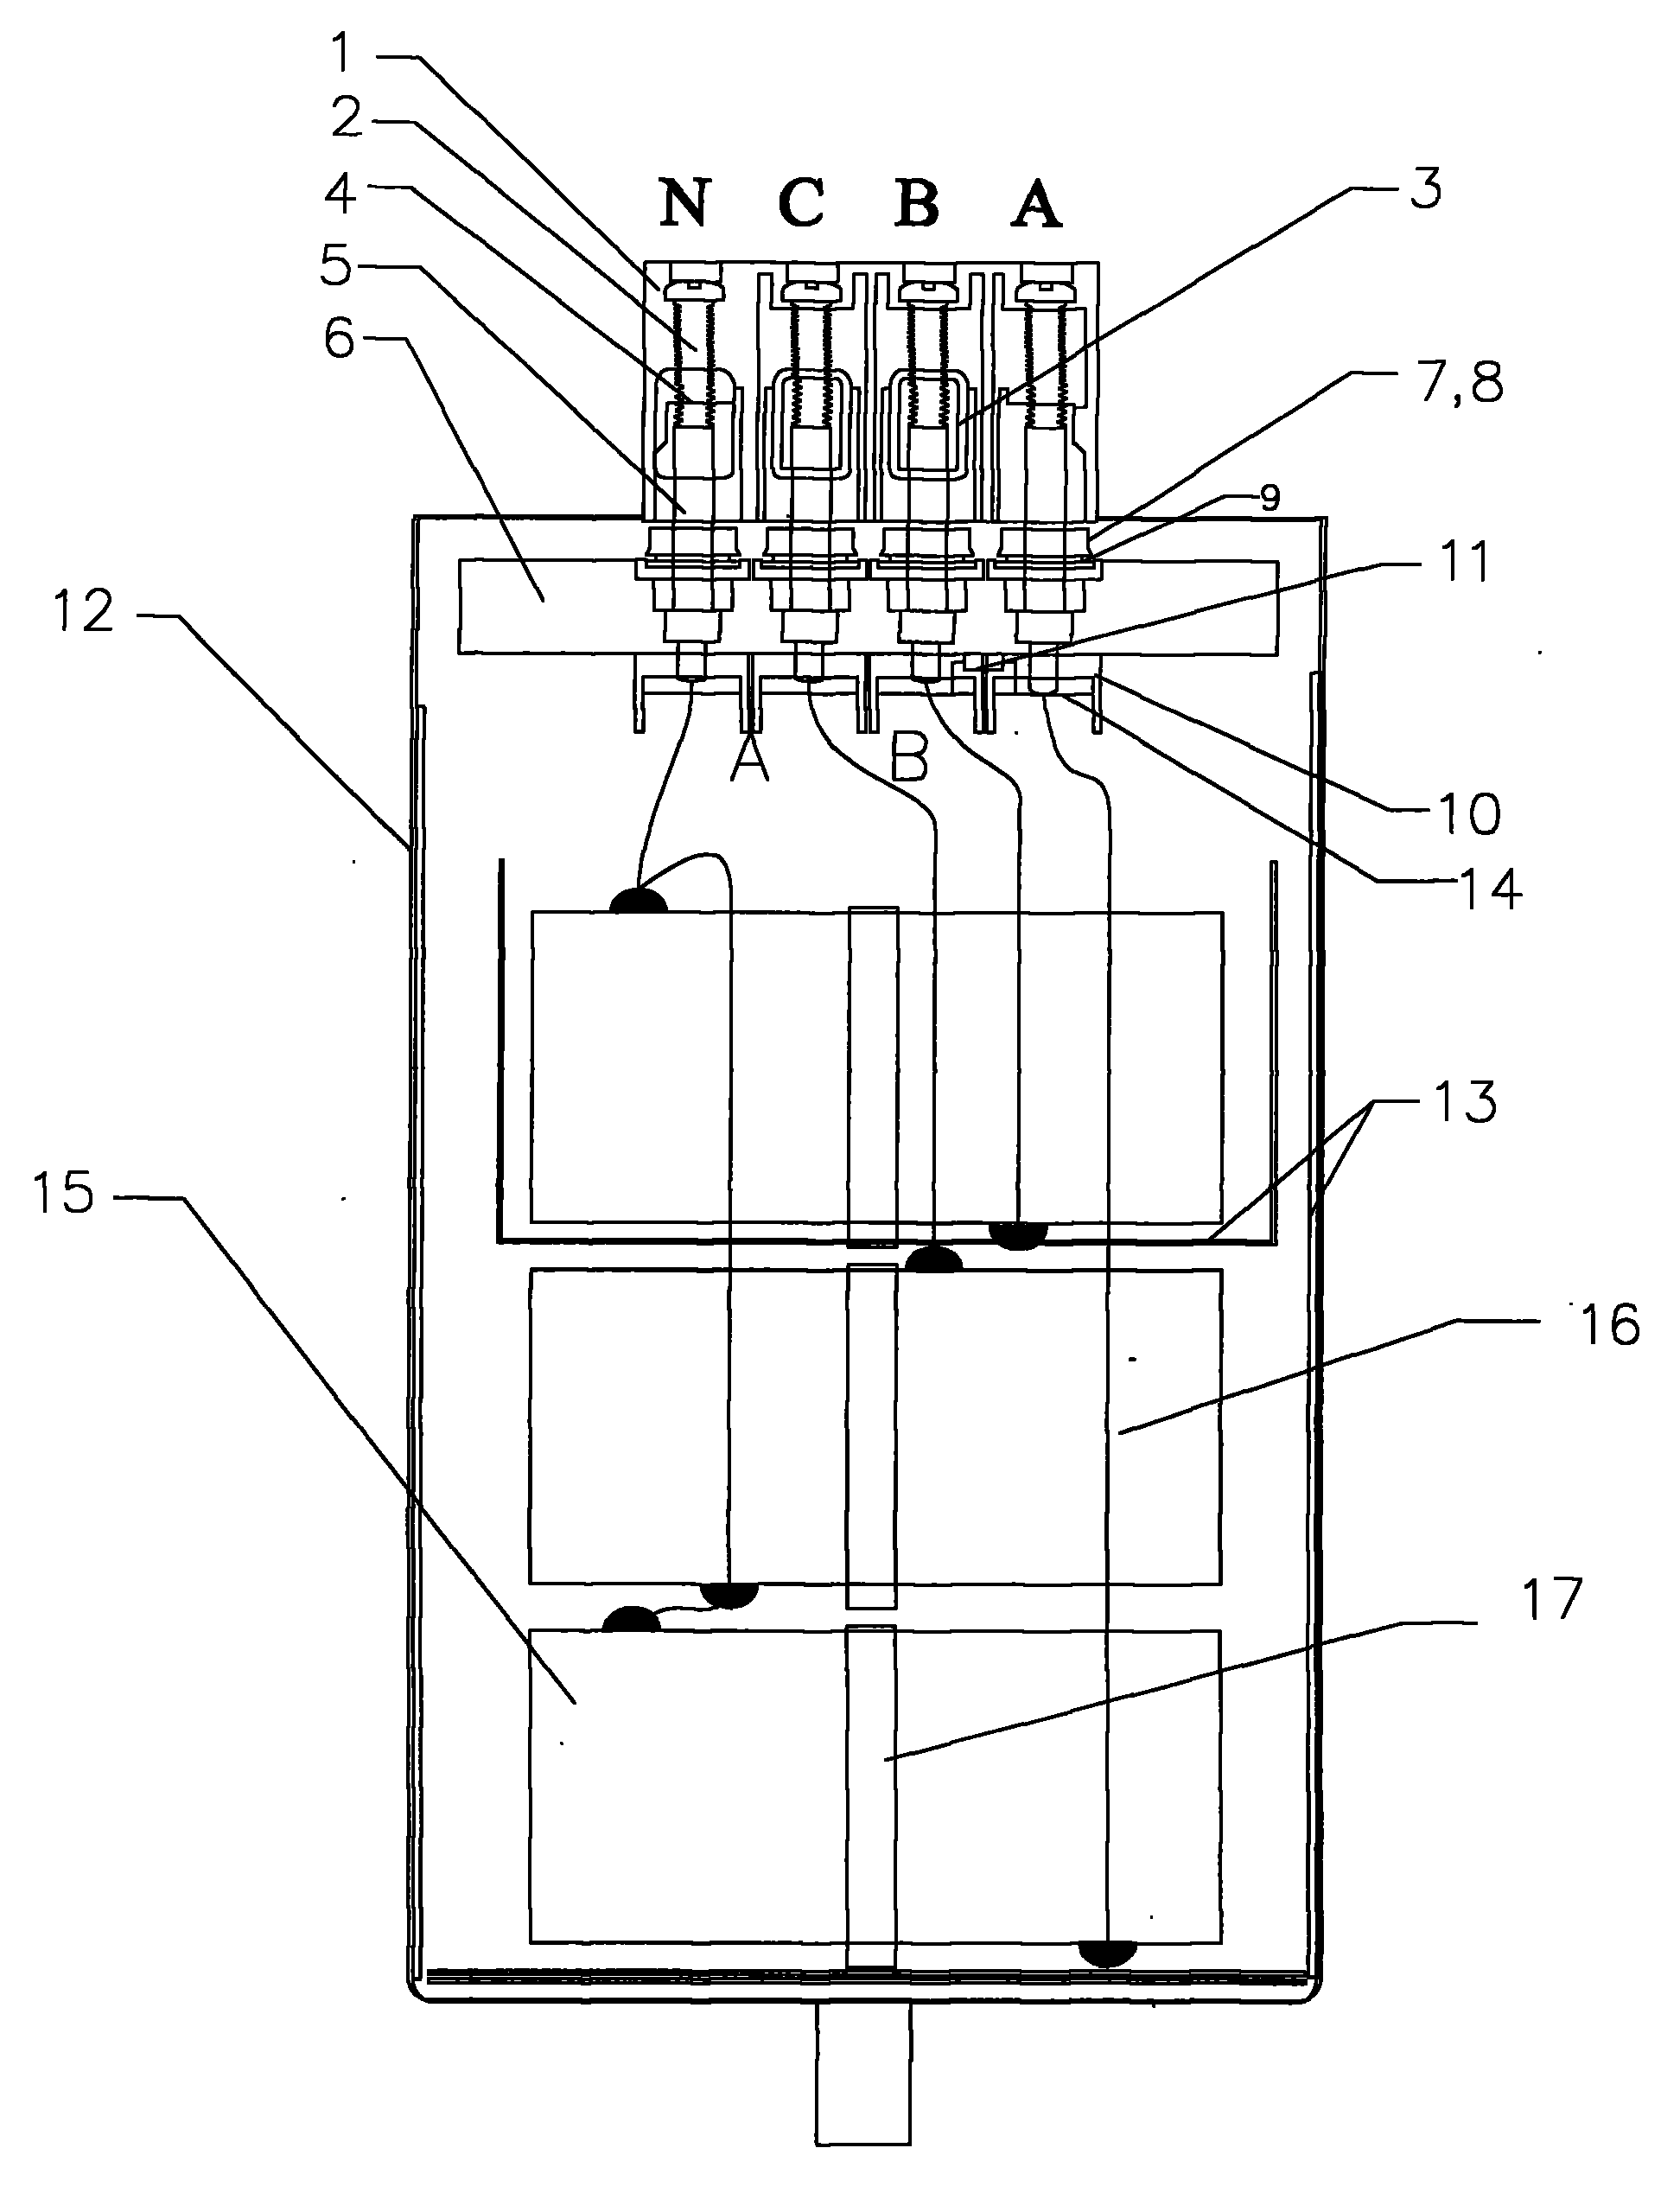 Split-phase compensation self-healing type reactive compensation capacitor